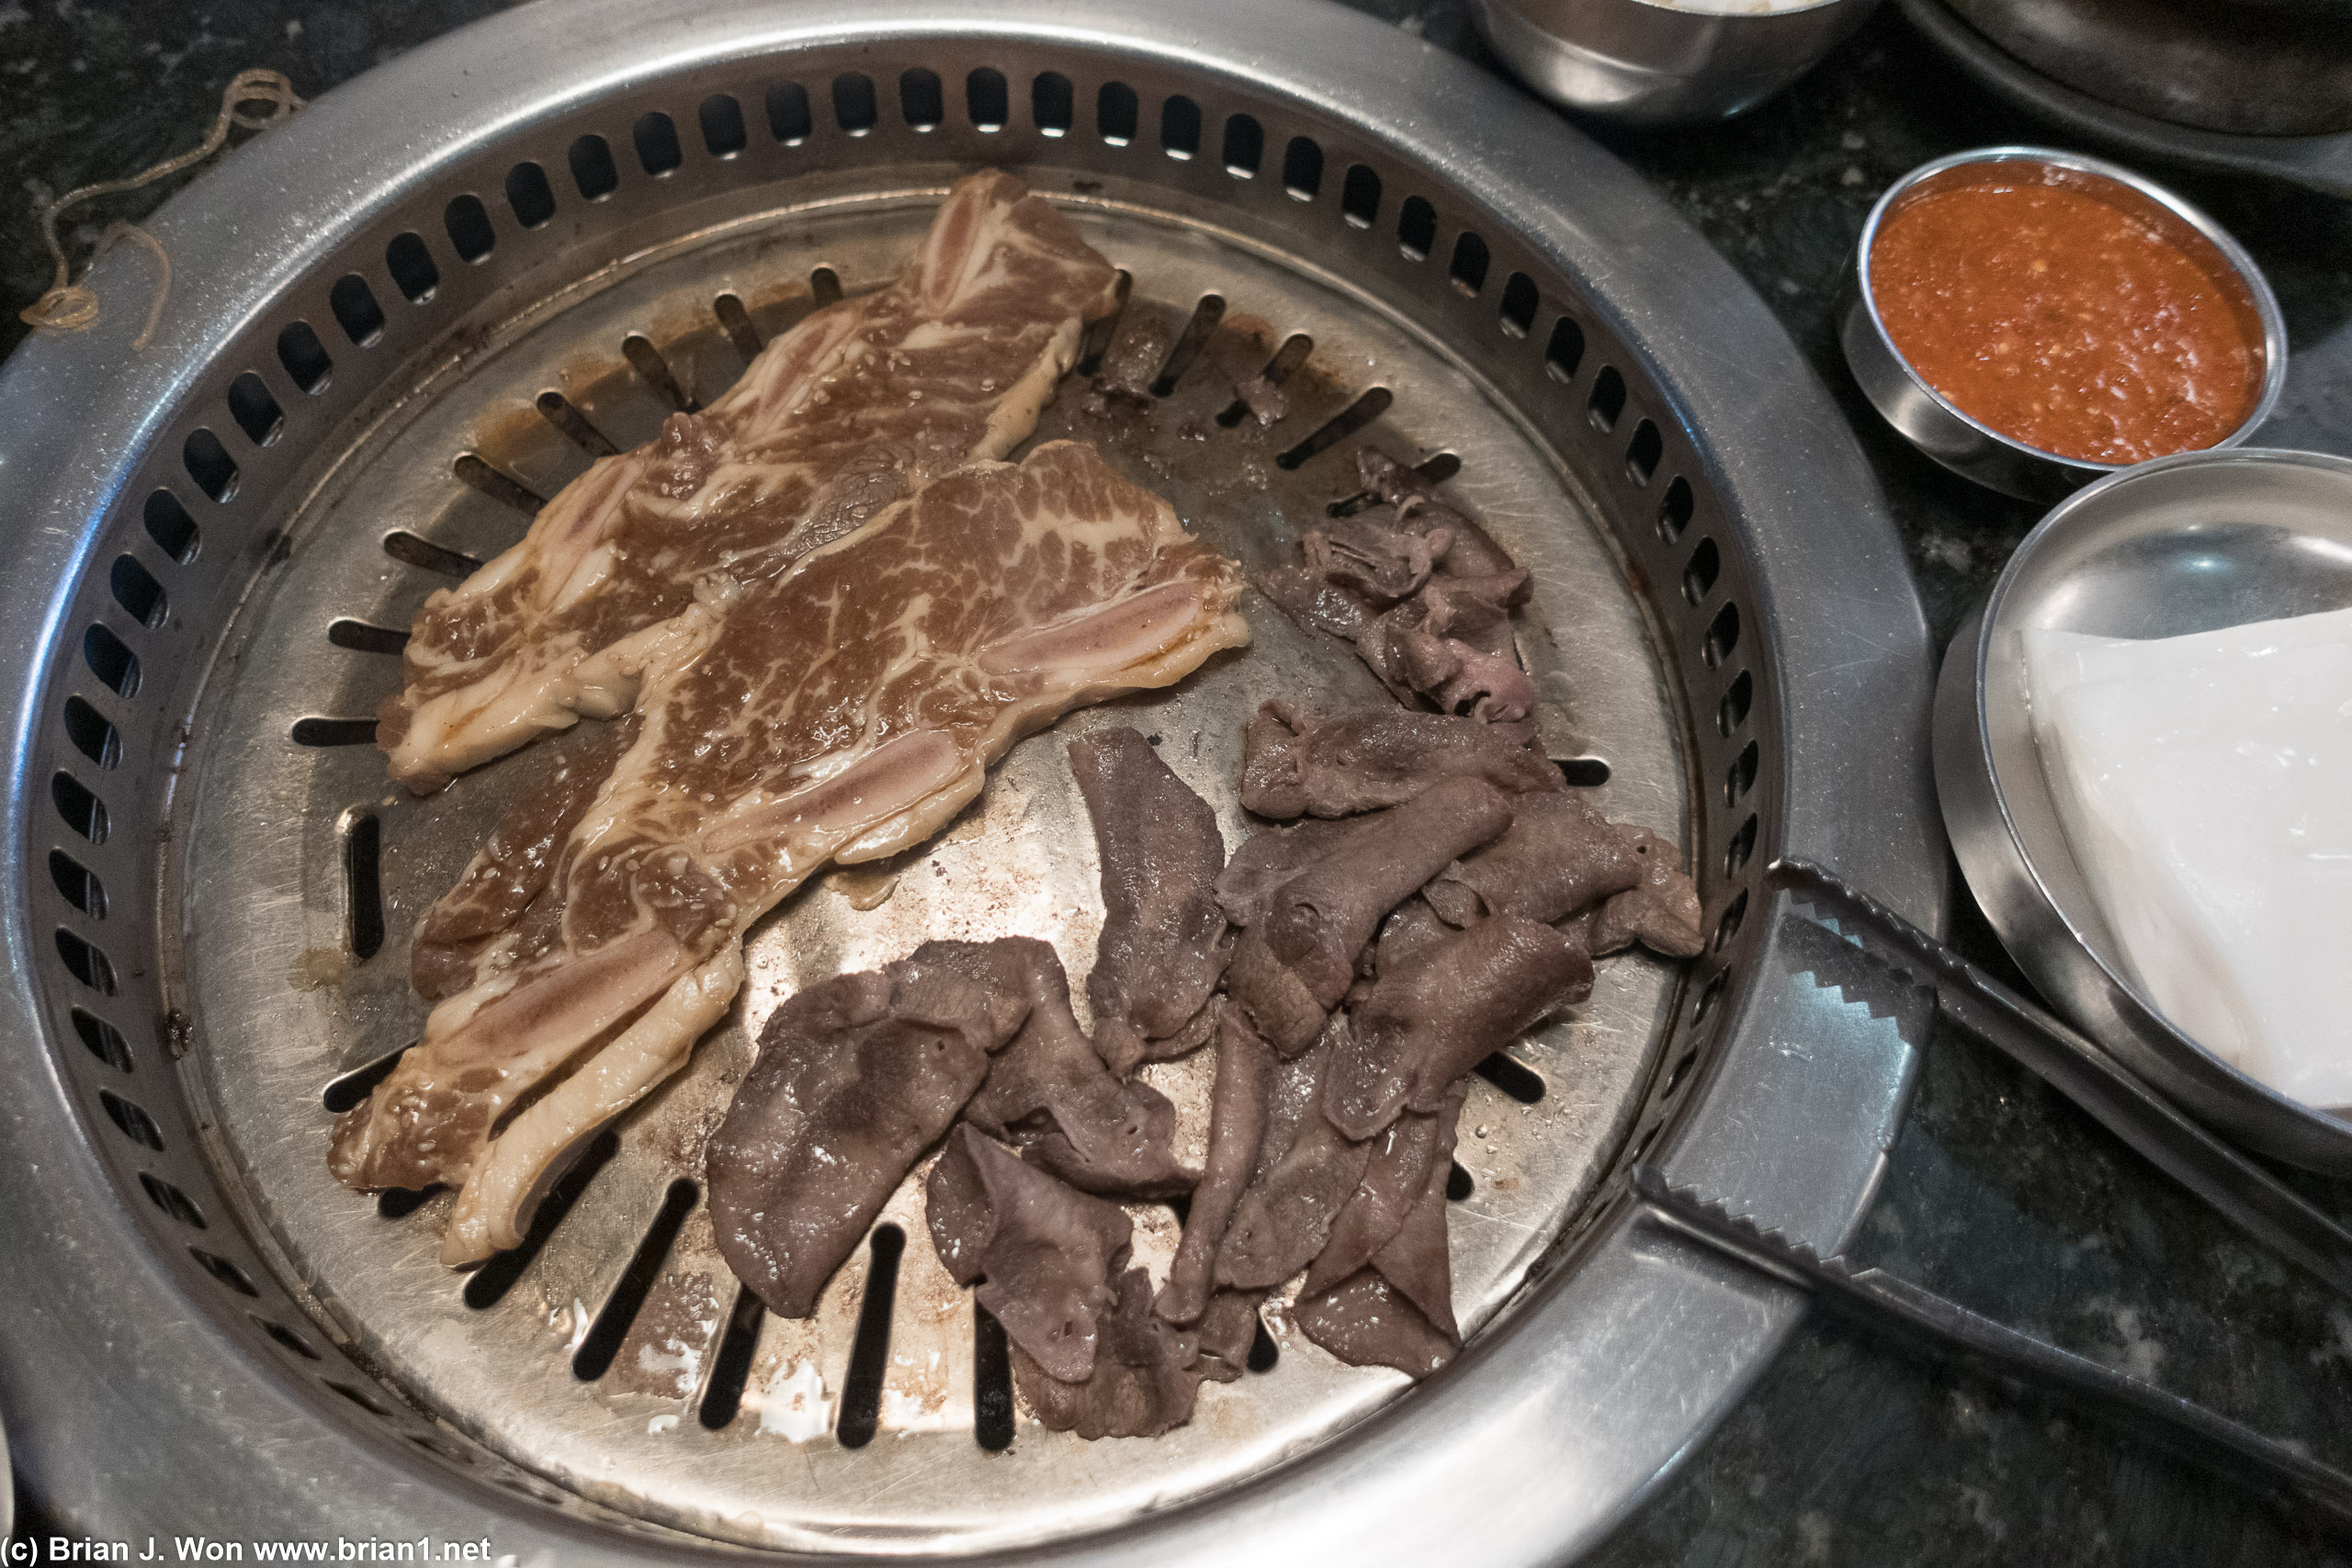 Galbi and tongue both on the grill.